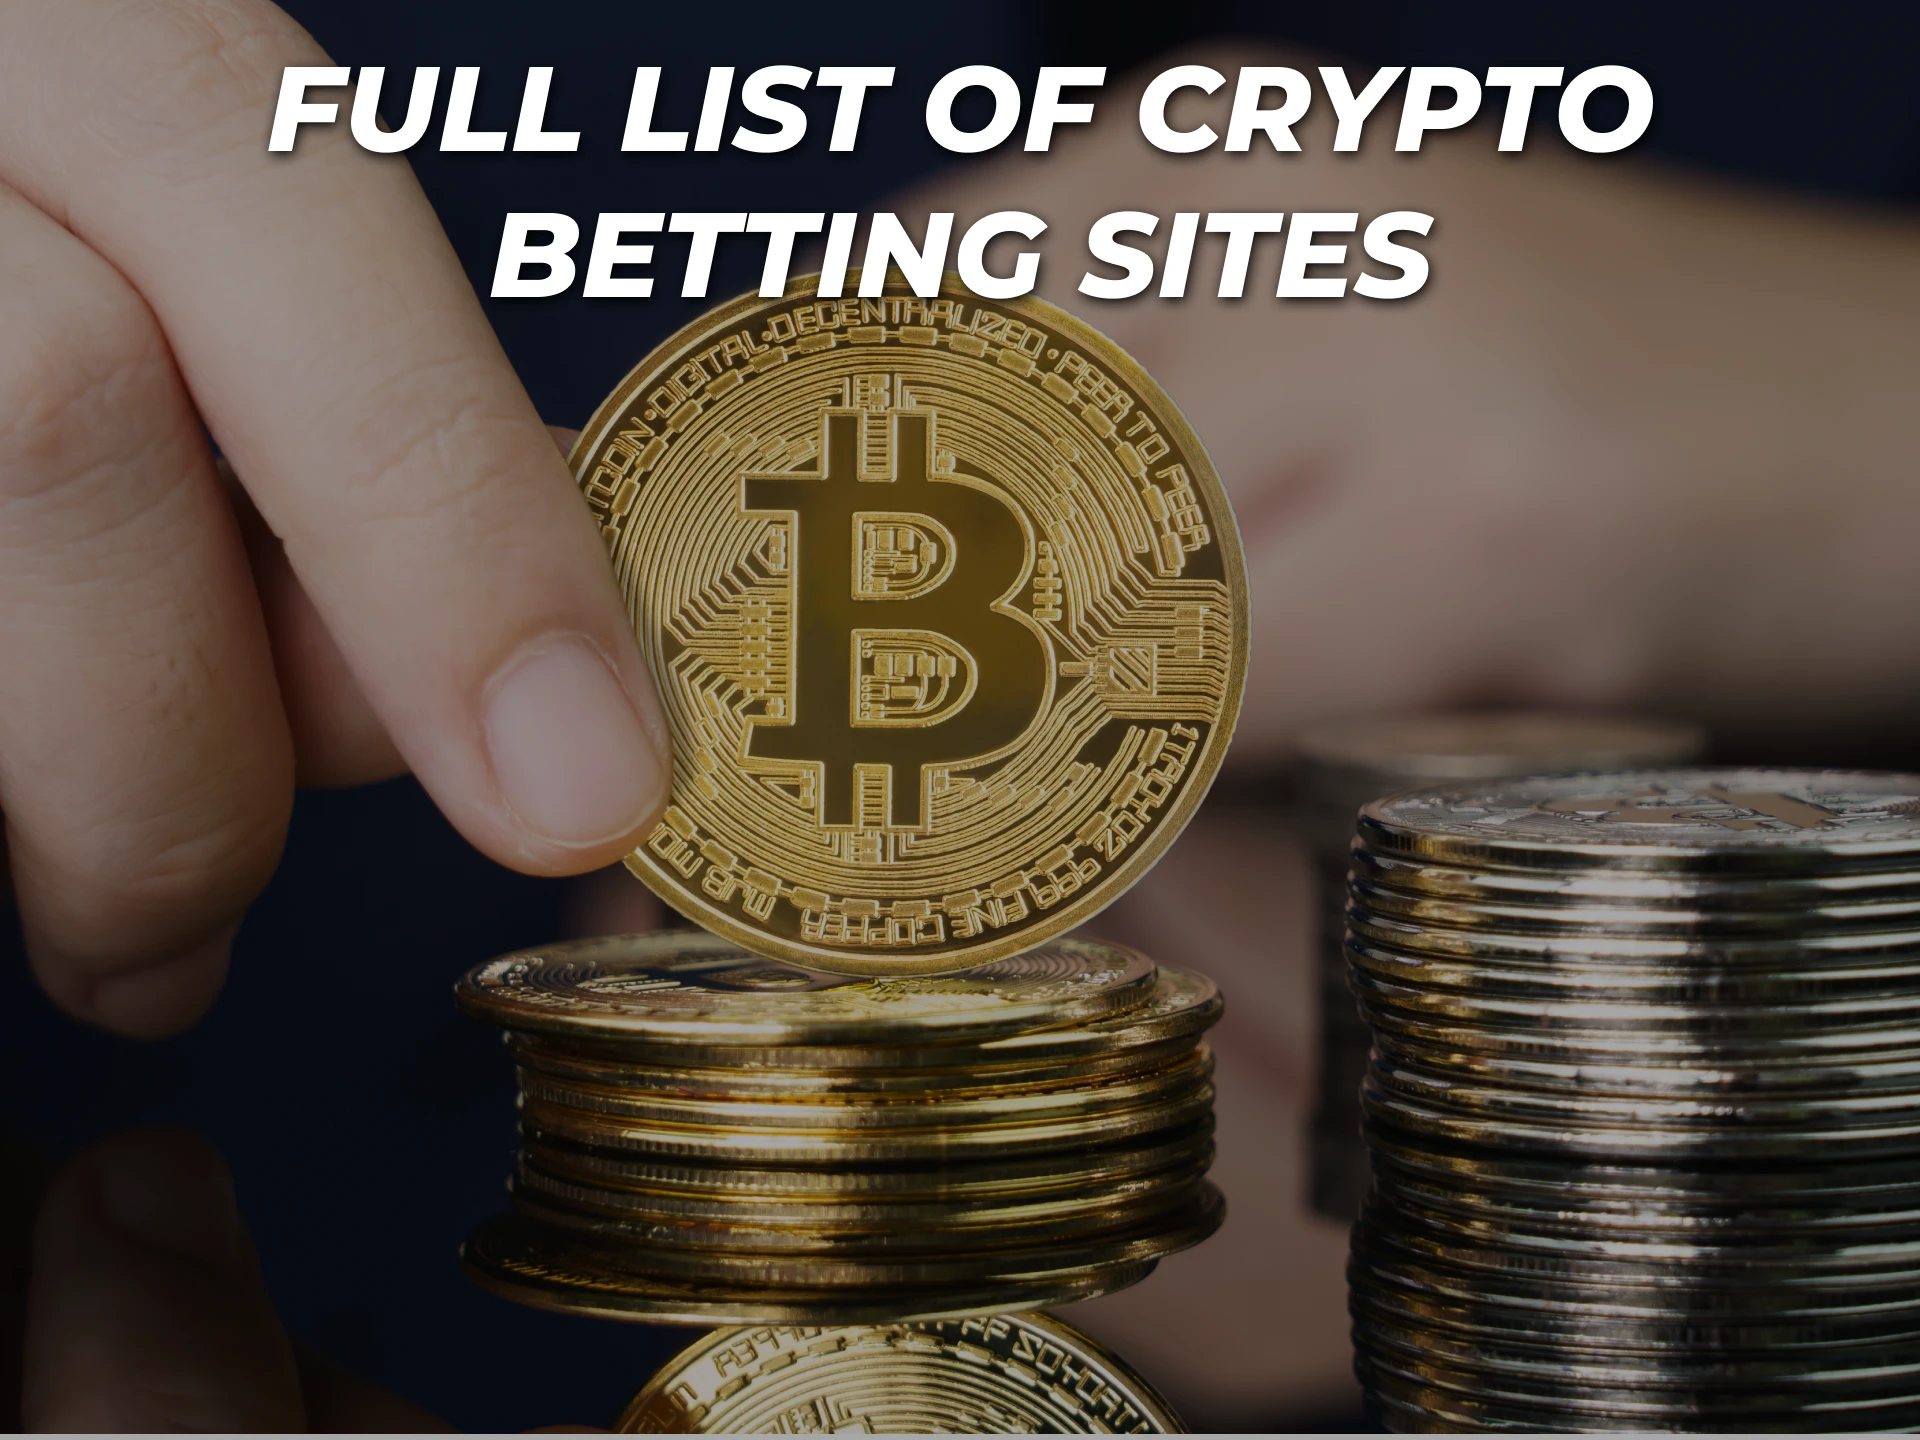 Here is a list of the best cryptocurrency betting sites.